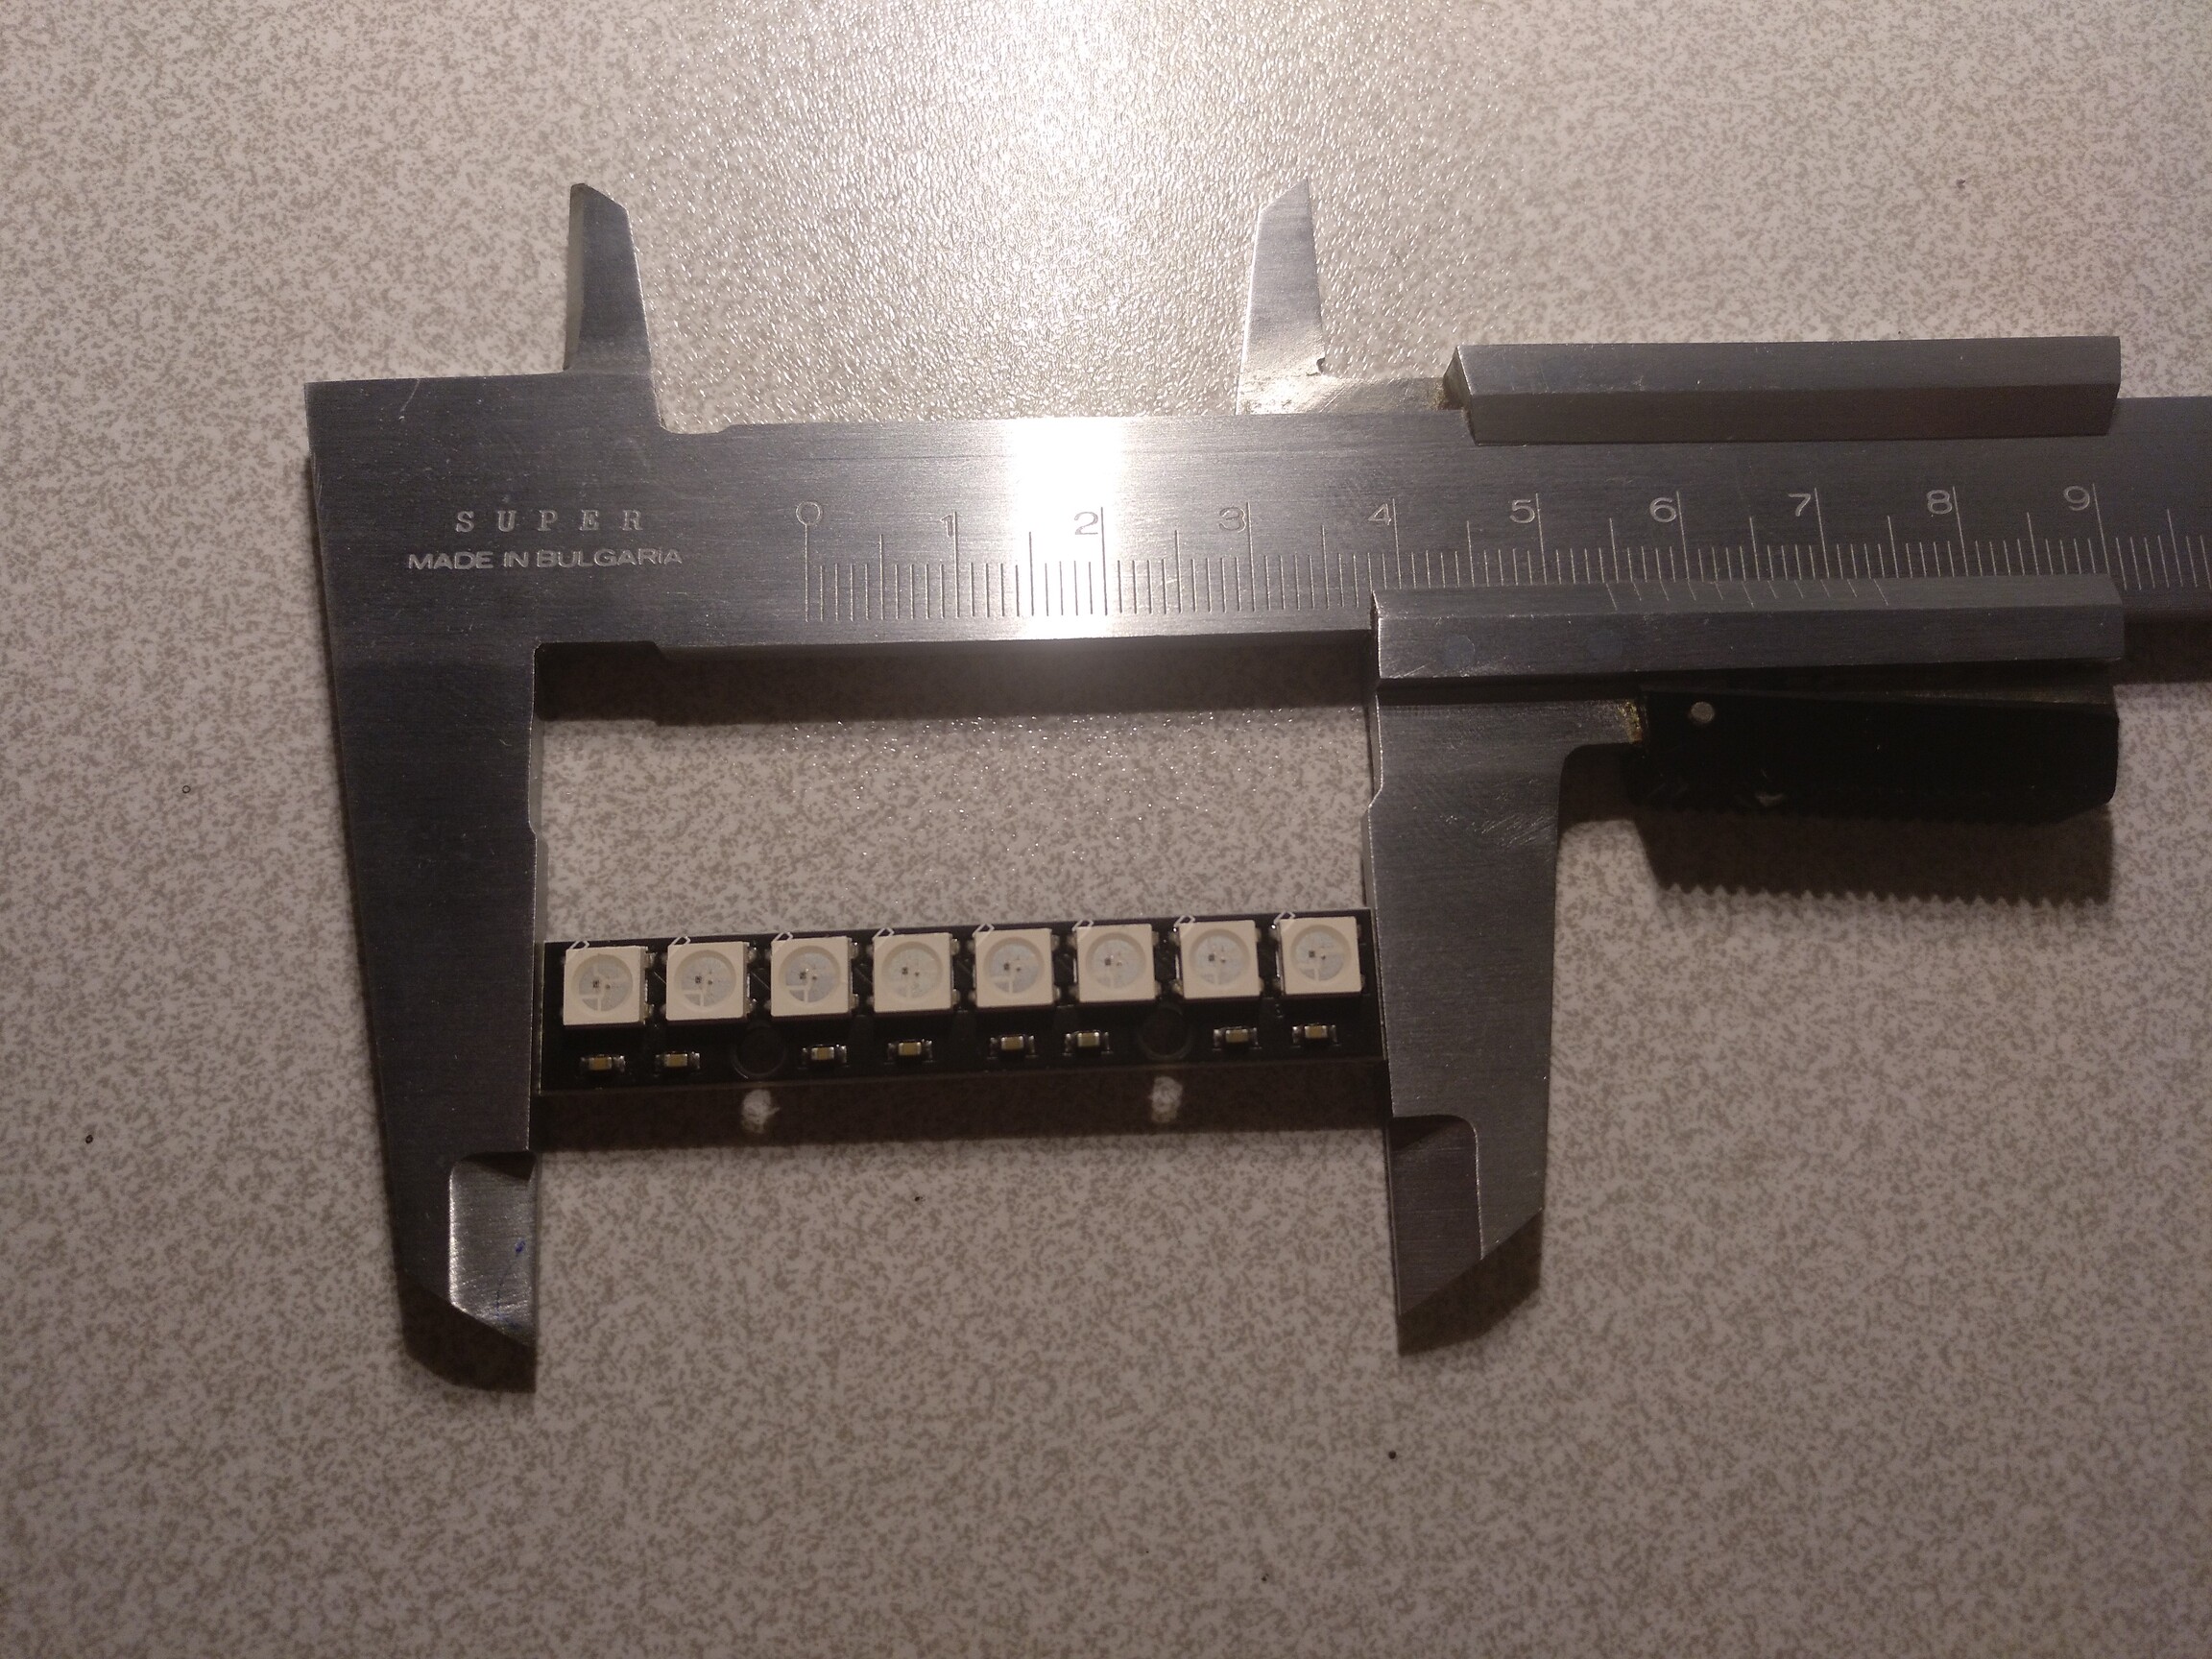 Calipers for scale